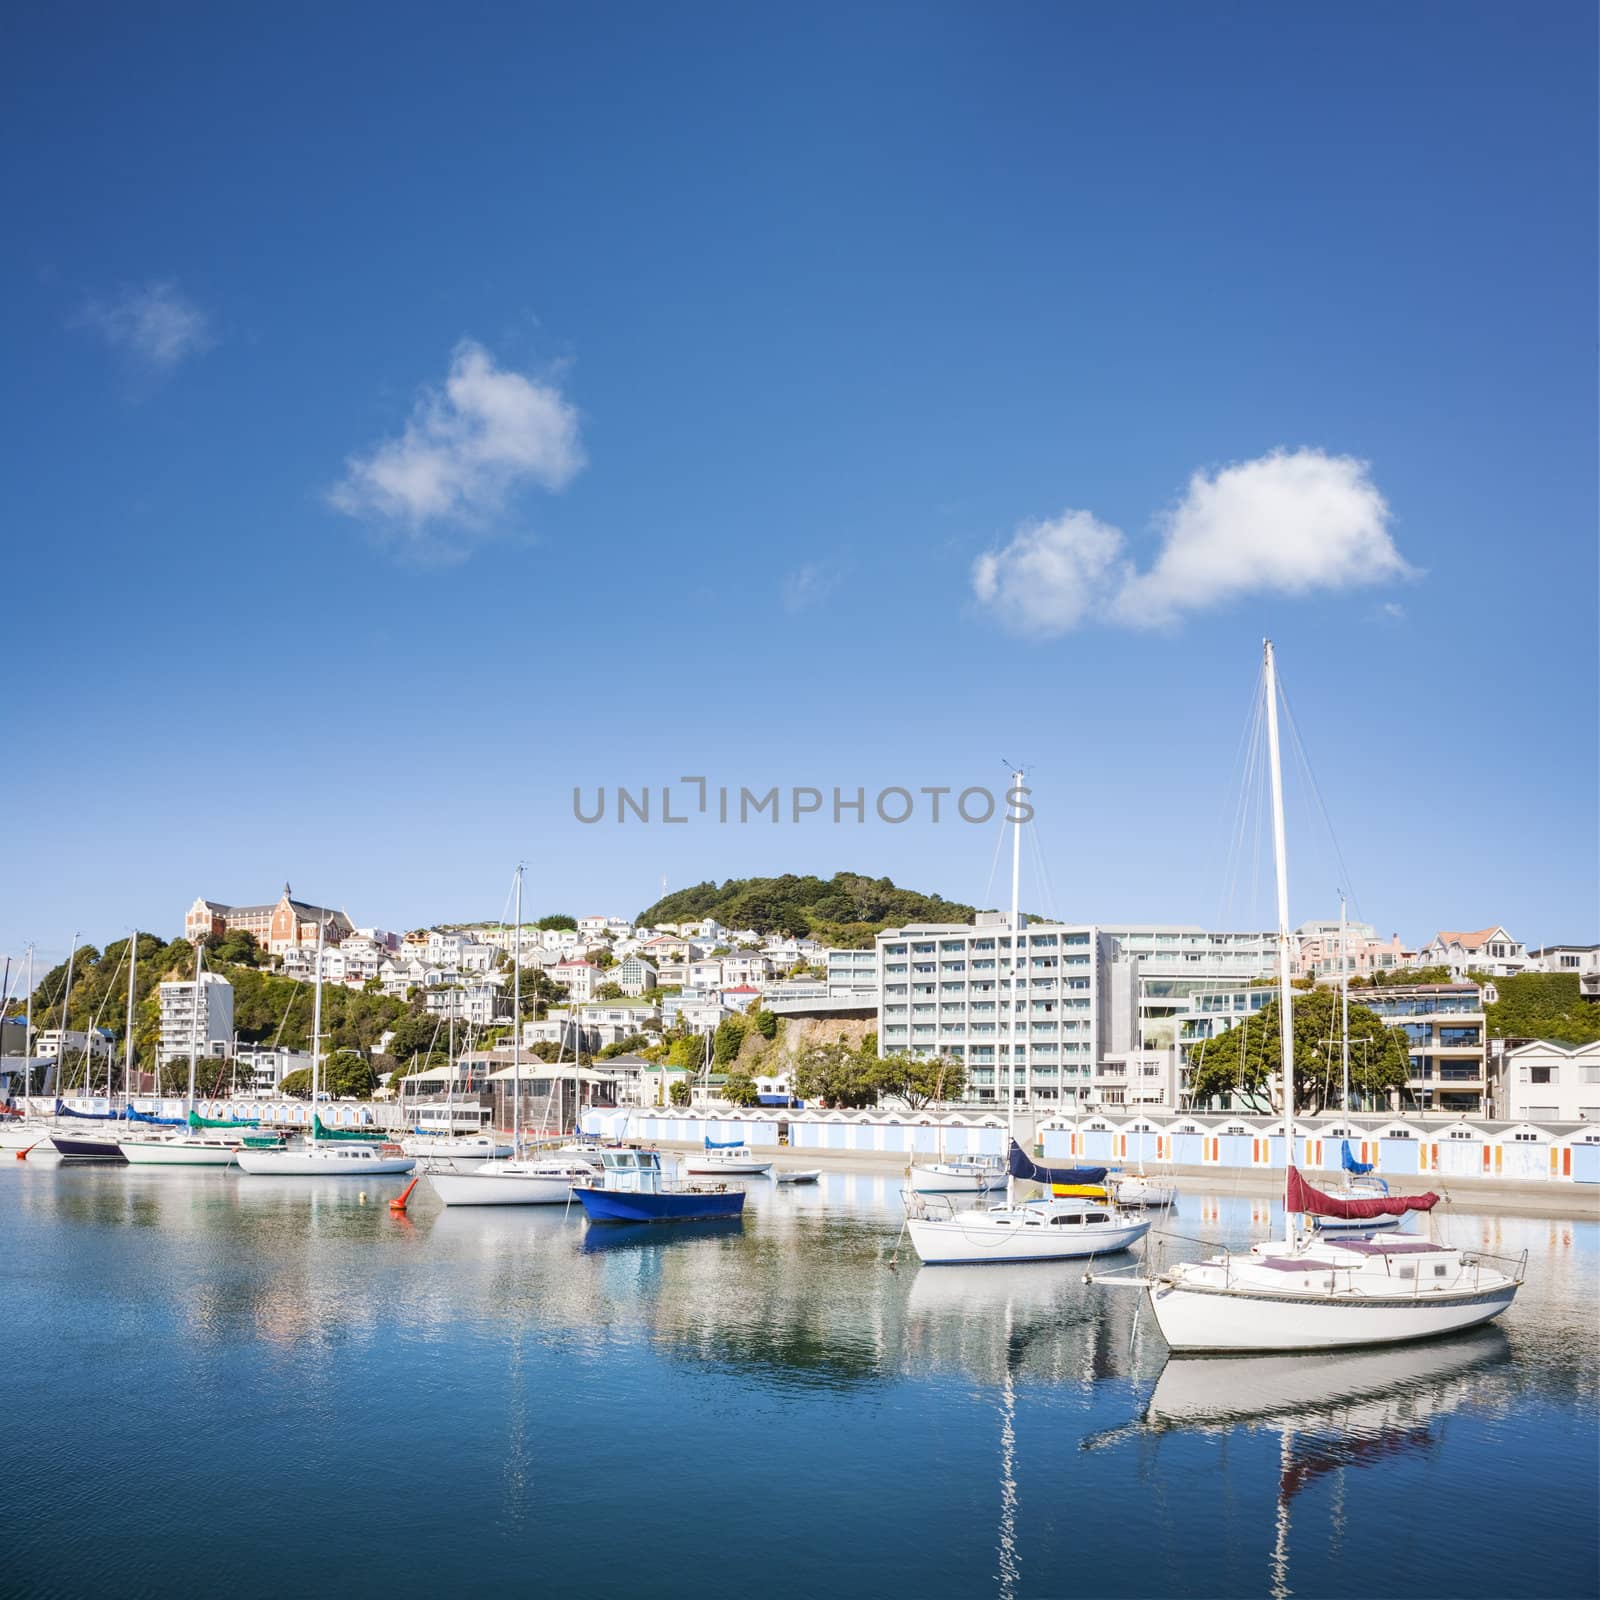 Some of New Zealand's most expensive real estate is situated in Oriental Bay, this beautiful Wellington hillside suburb overlooking the marina..***INSPECTORS THIS IS NOT UPSIZED, IT IS TWO PHOTOS JOINED***